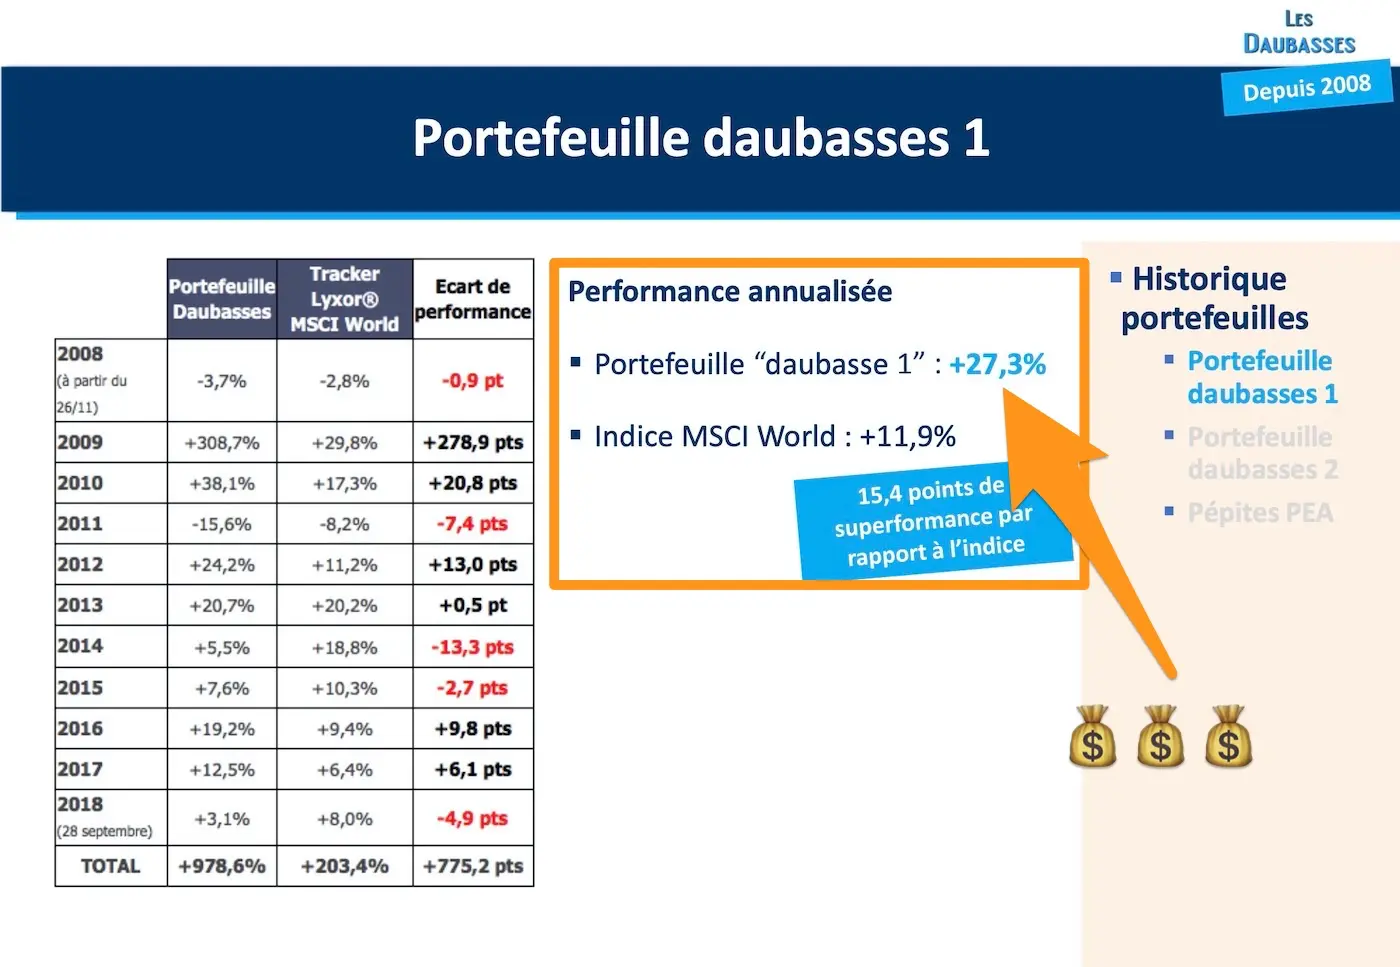 +27.3% annualised performance between 2008 and 2018 for the Daubasses portfolio